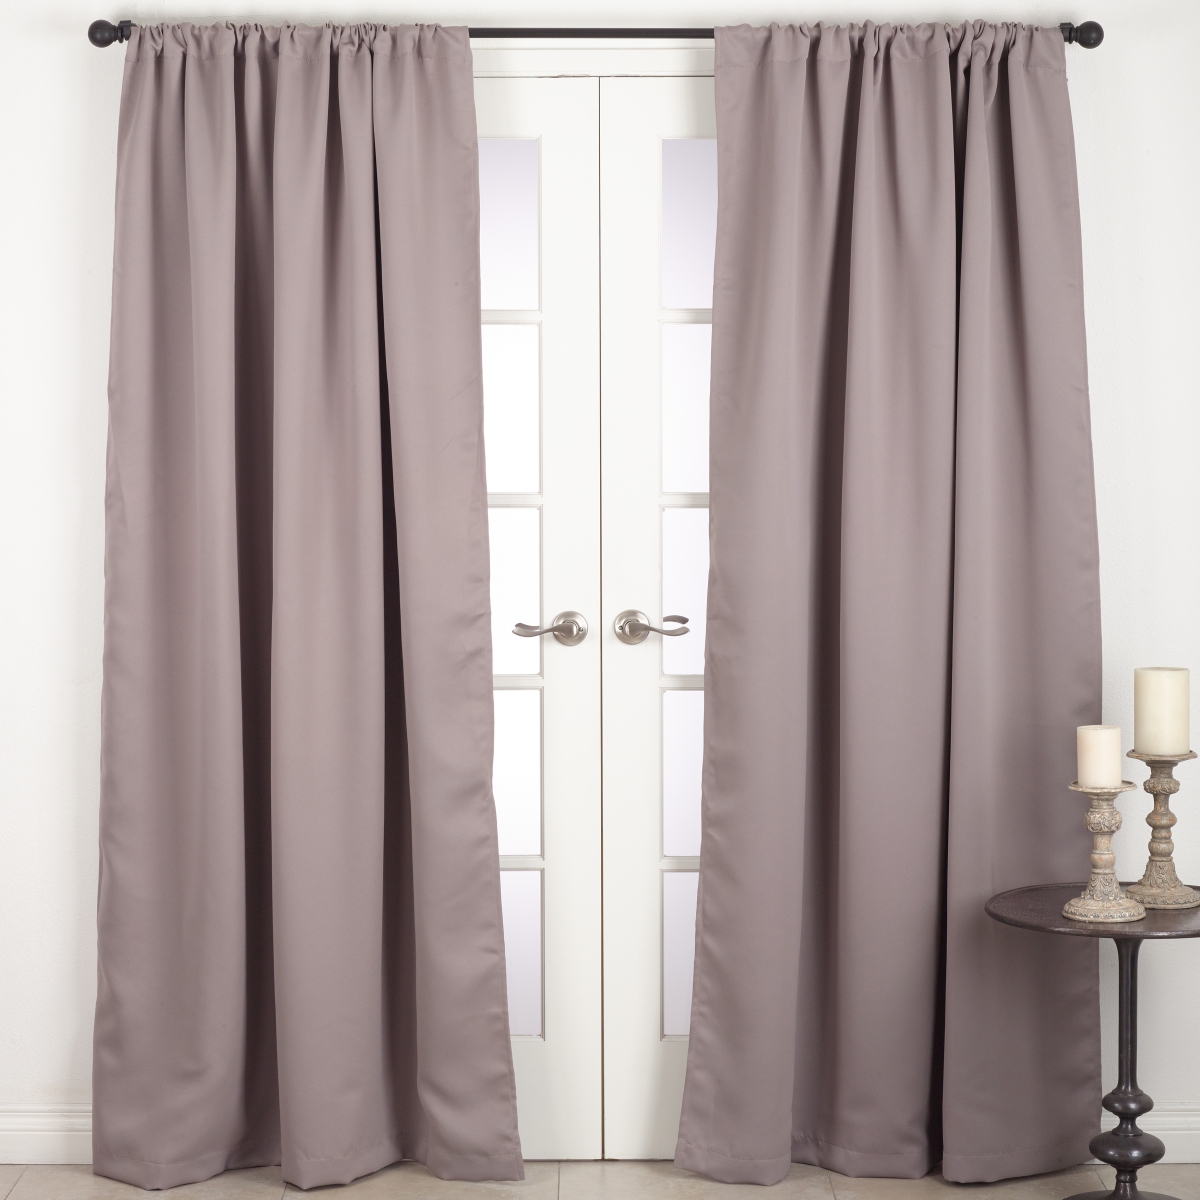 C115.t54108 54 X 108 In. Solid Rod Pocket Blackout Window Curtain Panel, Taupe